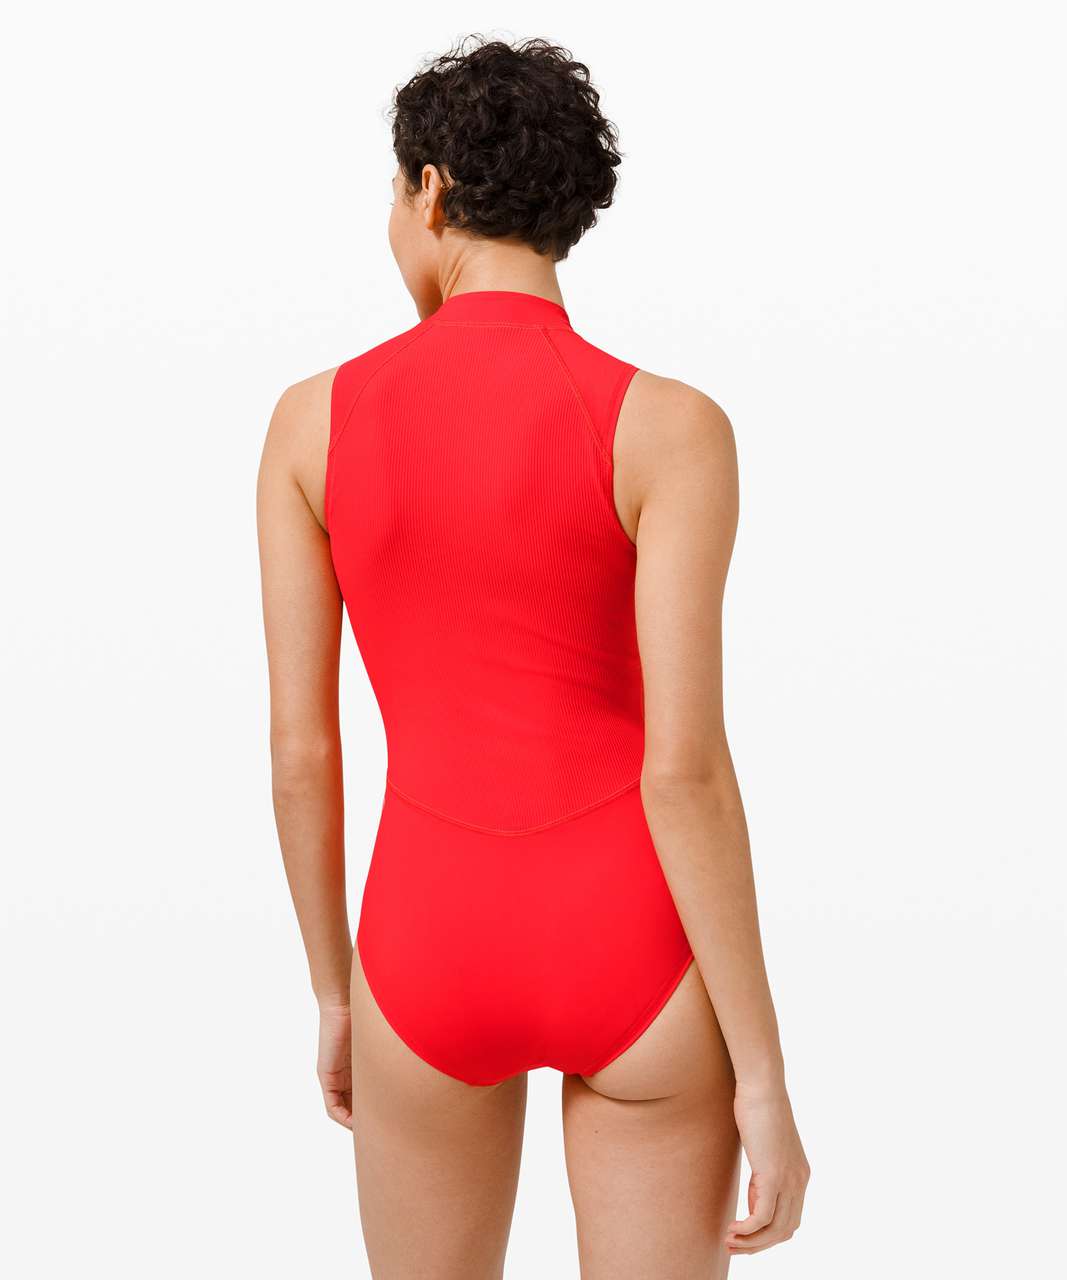 Lululemon Wade the Waters Paddle Suit - True Red